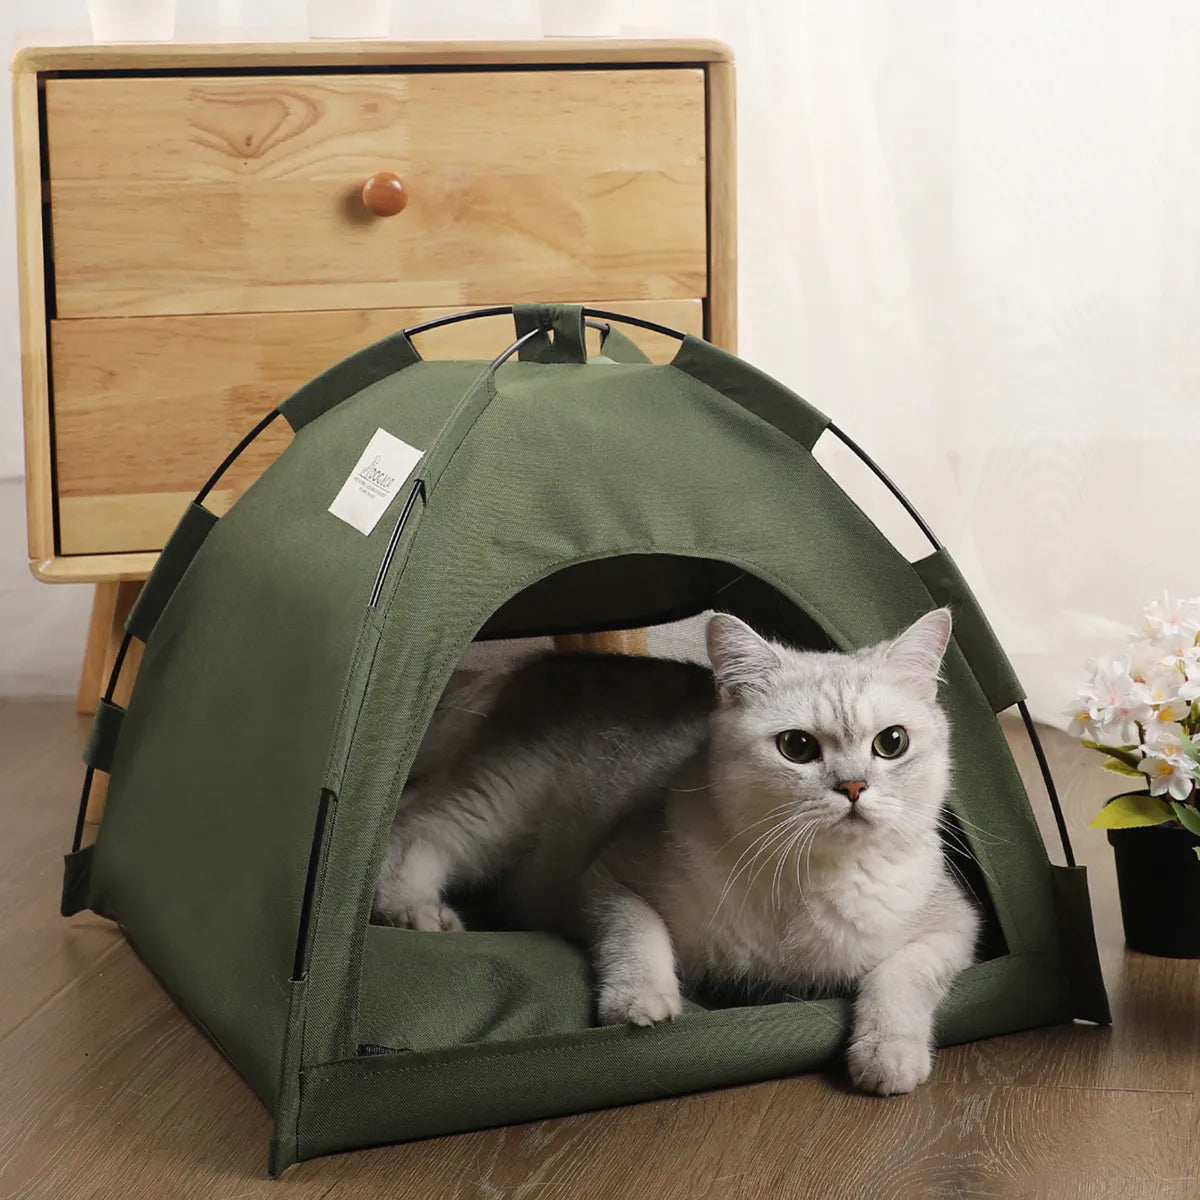 Cozy Cat Tent Bed with Warm Accessories: Breathable Winter Supplies for Feline Comfort  My Store   